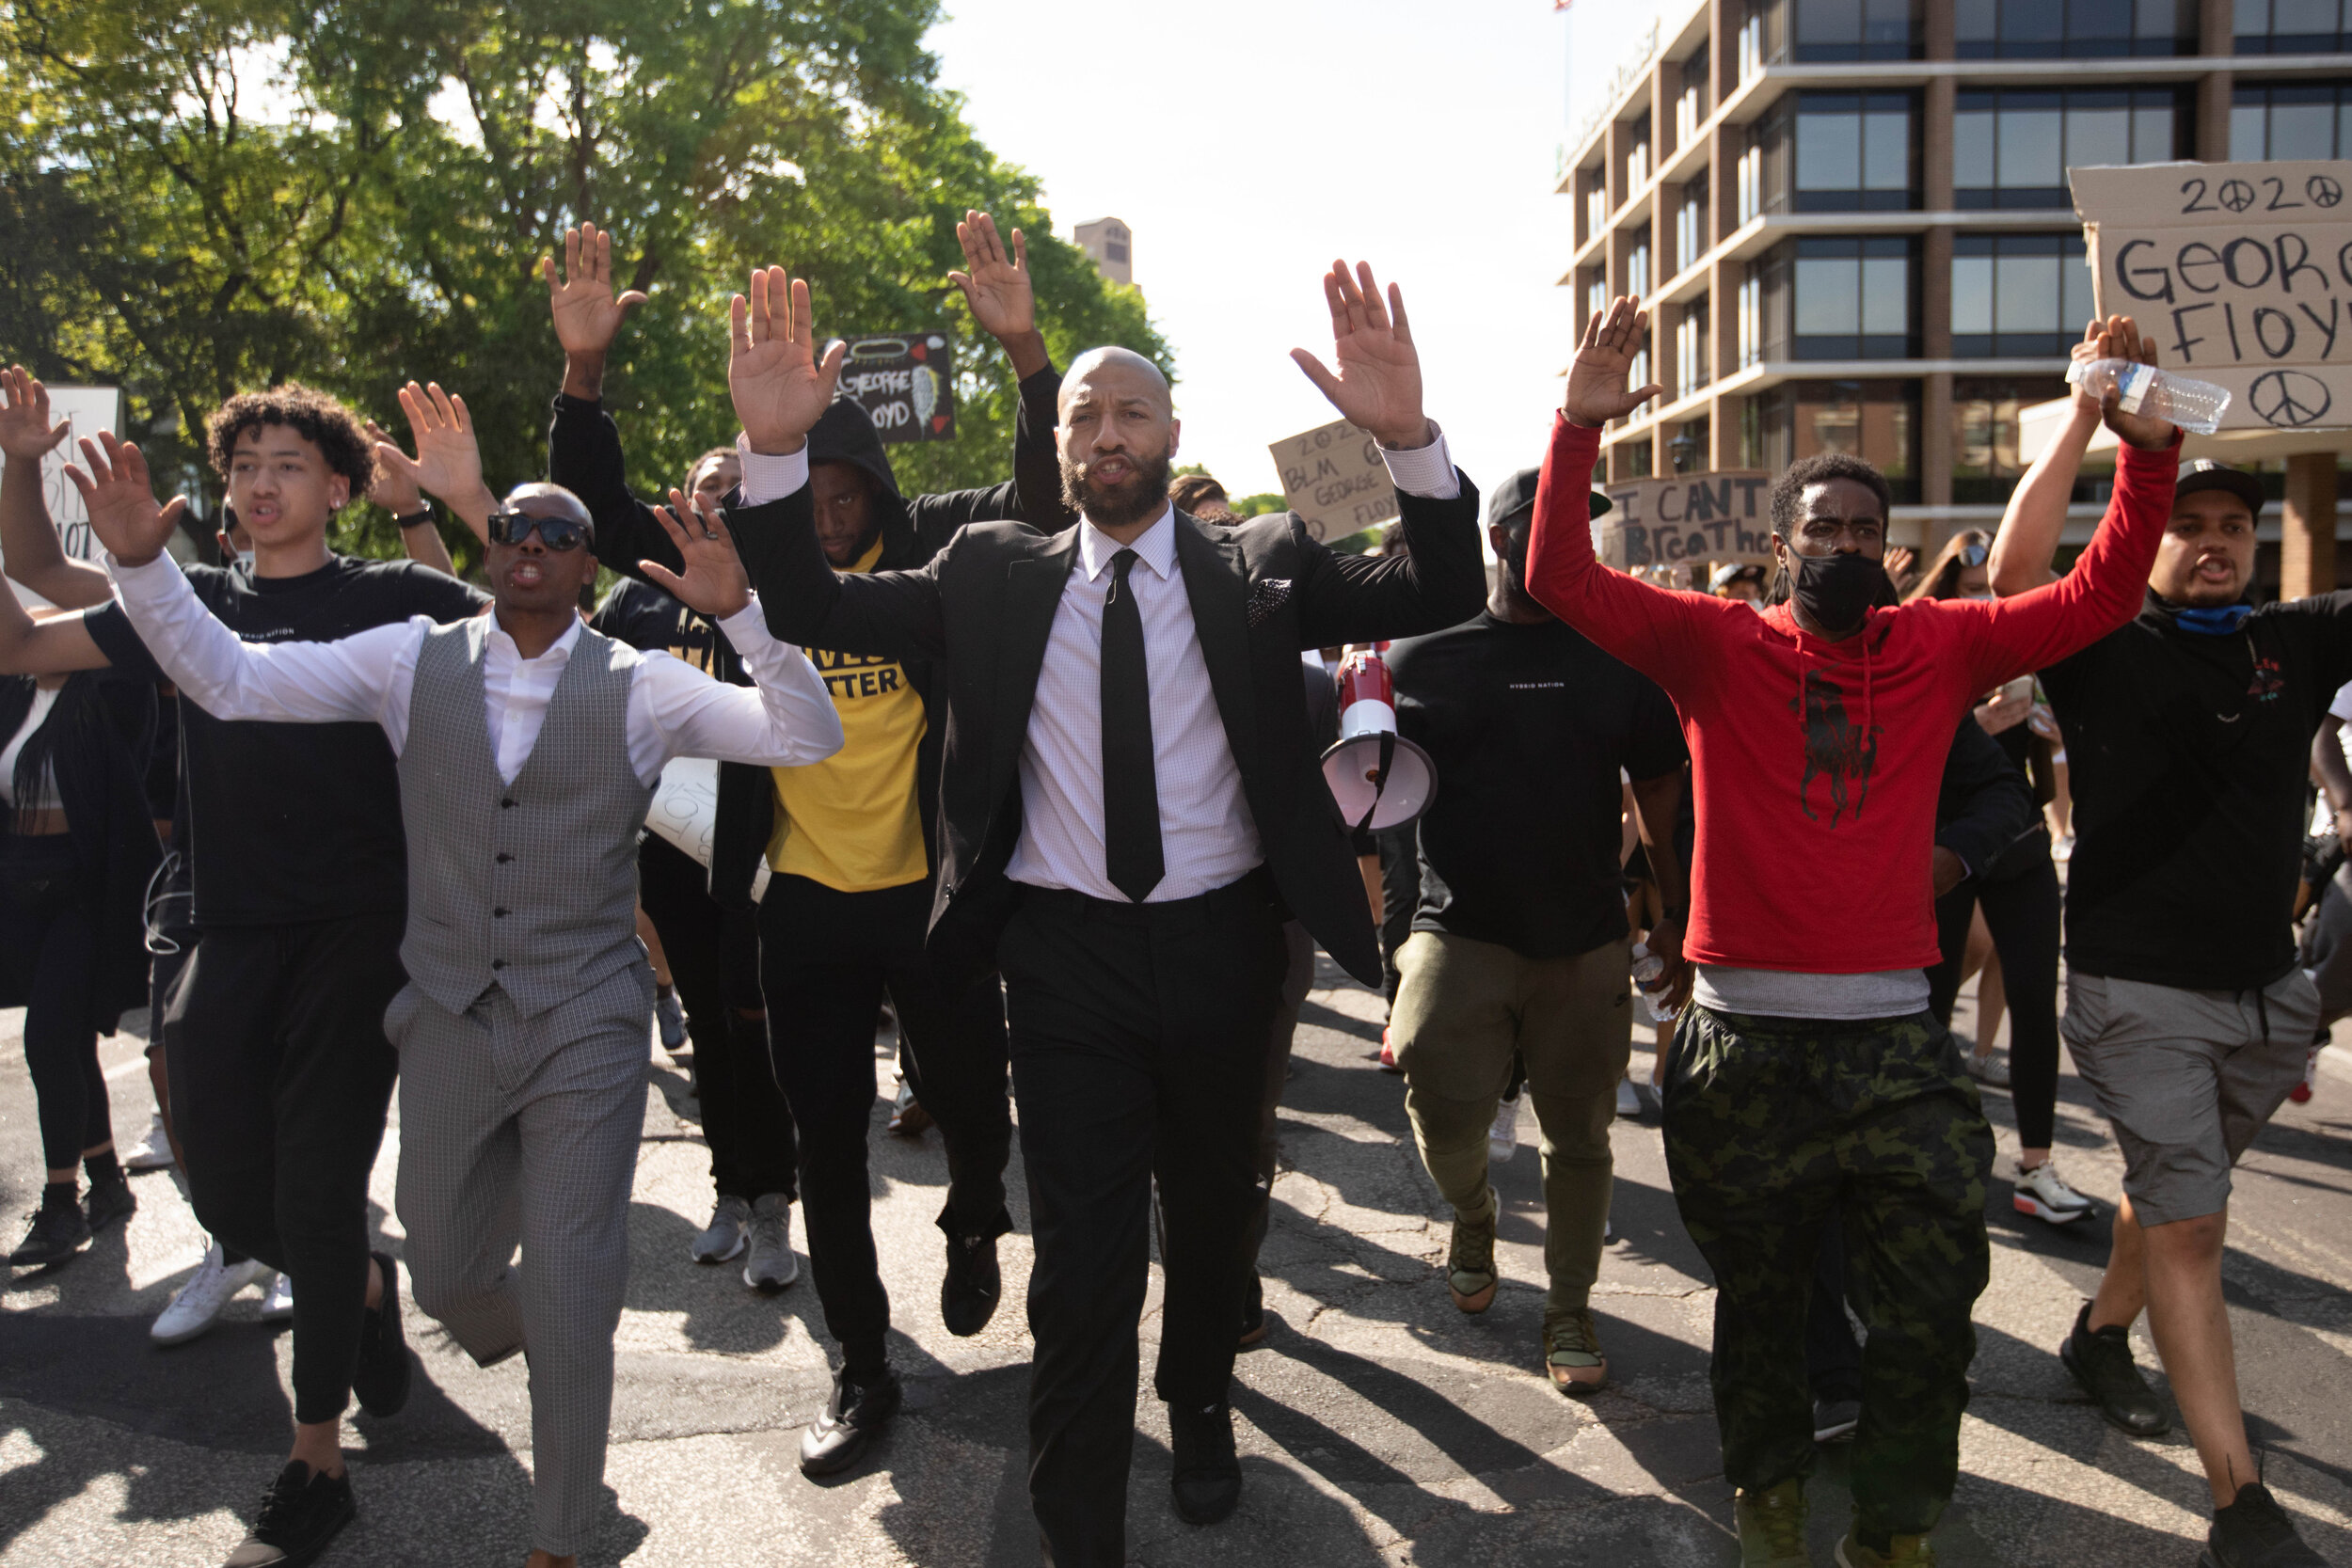  "Hands up, don't shoot," was chnated by protesters as athletes led protesters down University Avenue in Minneapolis, Minnesota while protesting the police killing of Geroge Floyd on May 31, 2020. Chris Juhn/Zenger 